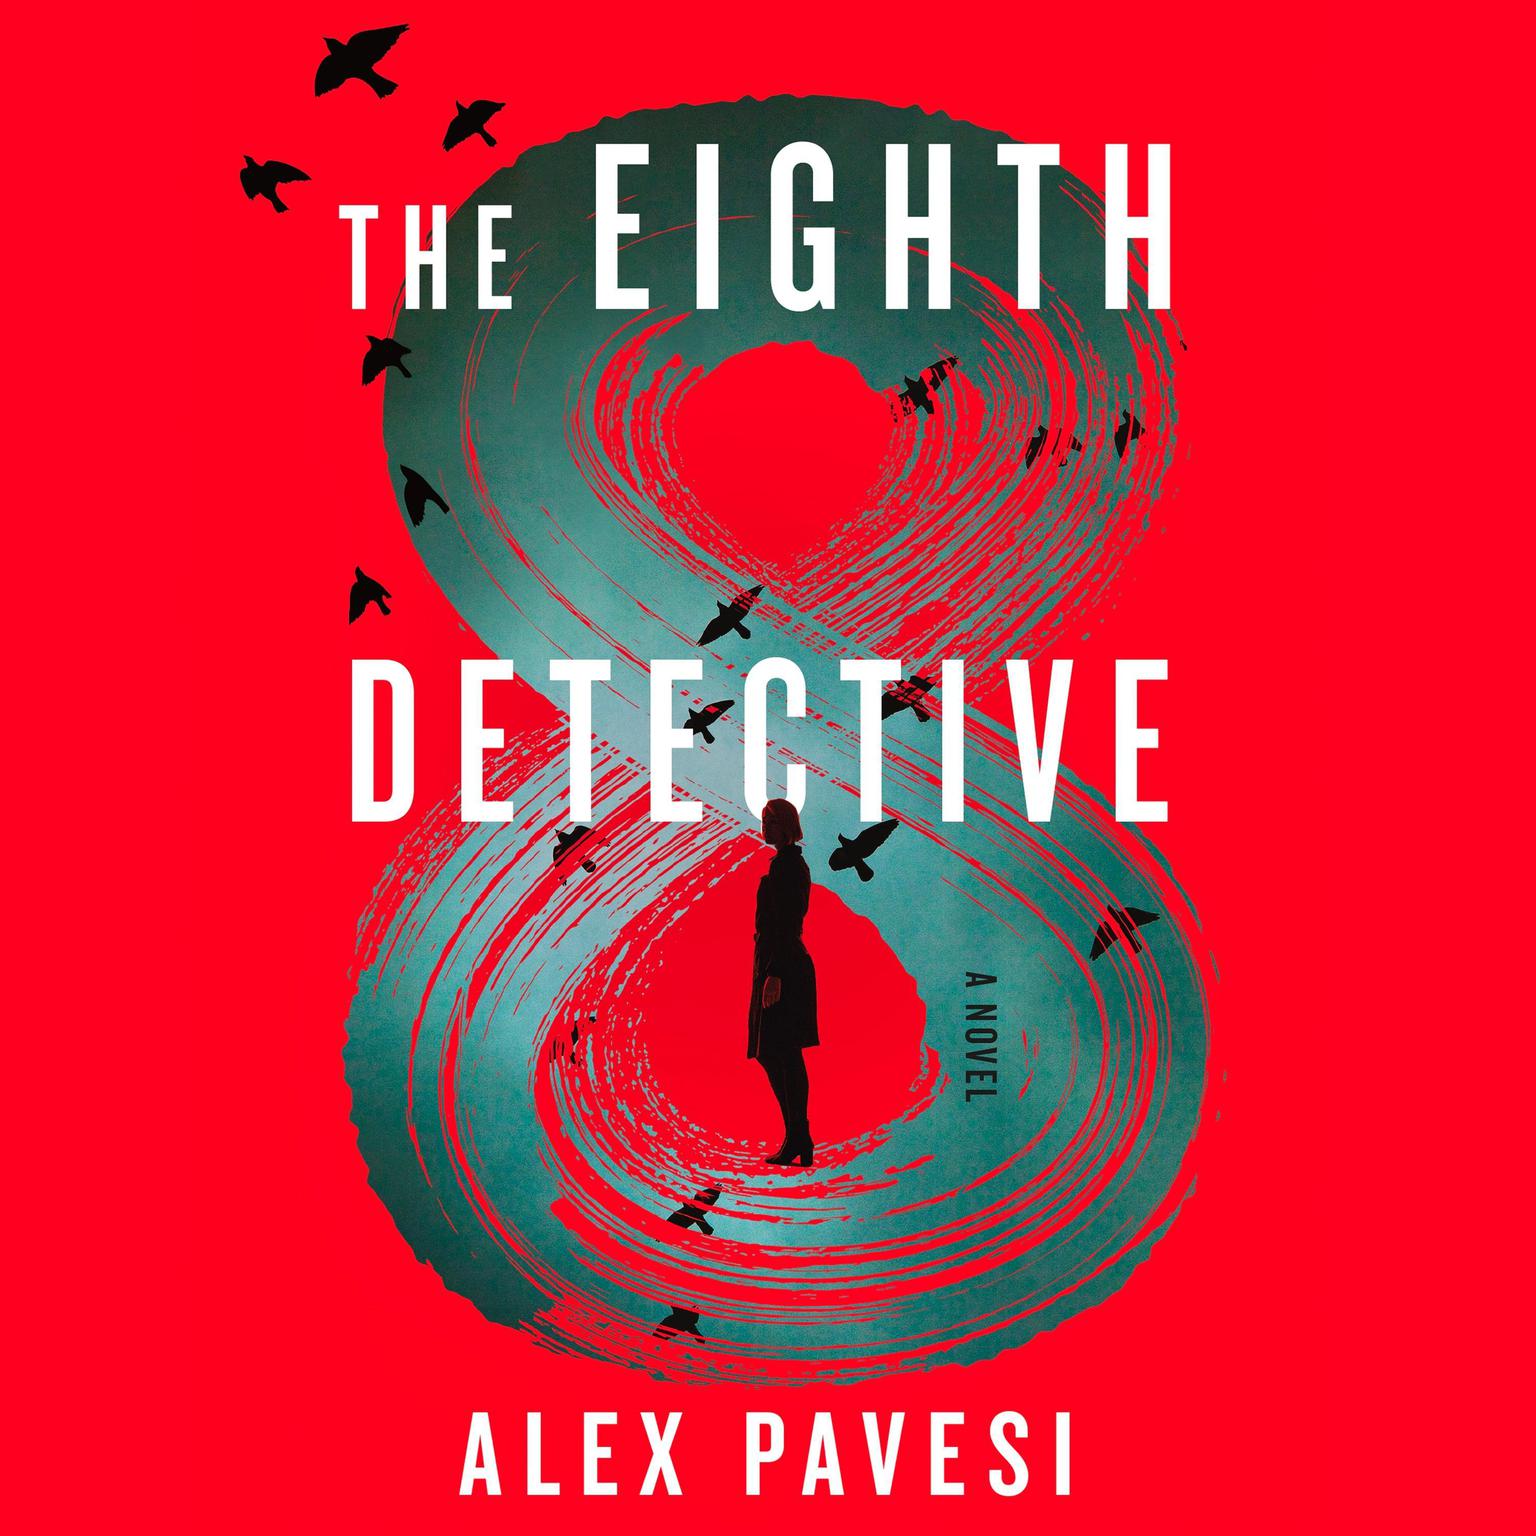 The Eighth Detective: A Novel Audiobook, by Alex Pavesi